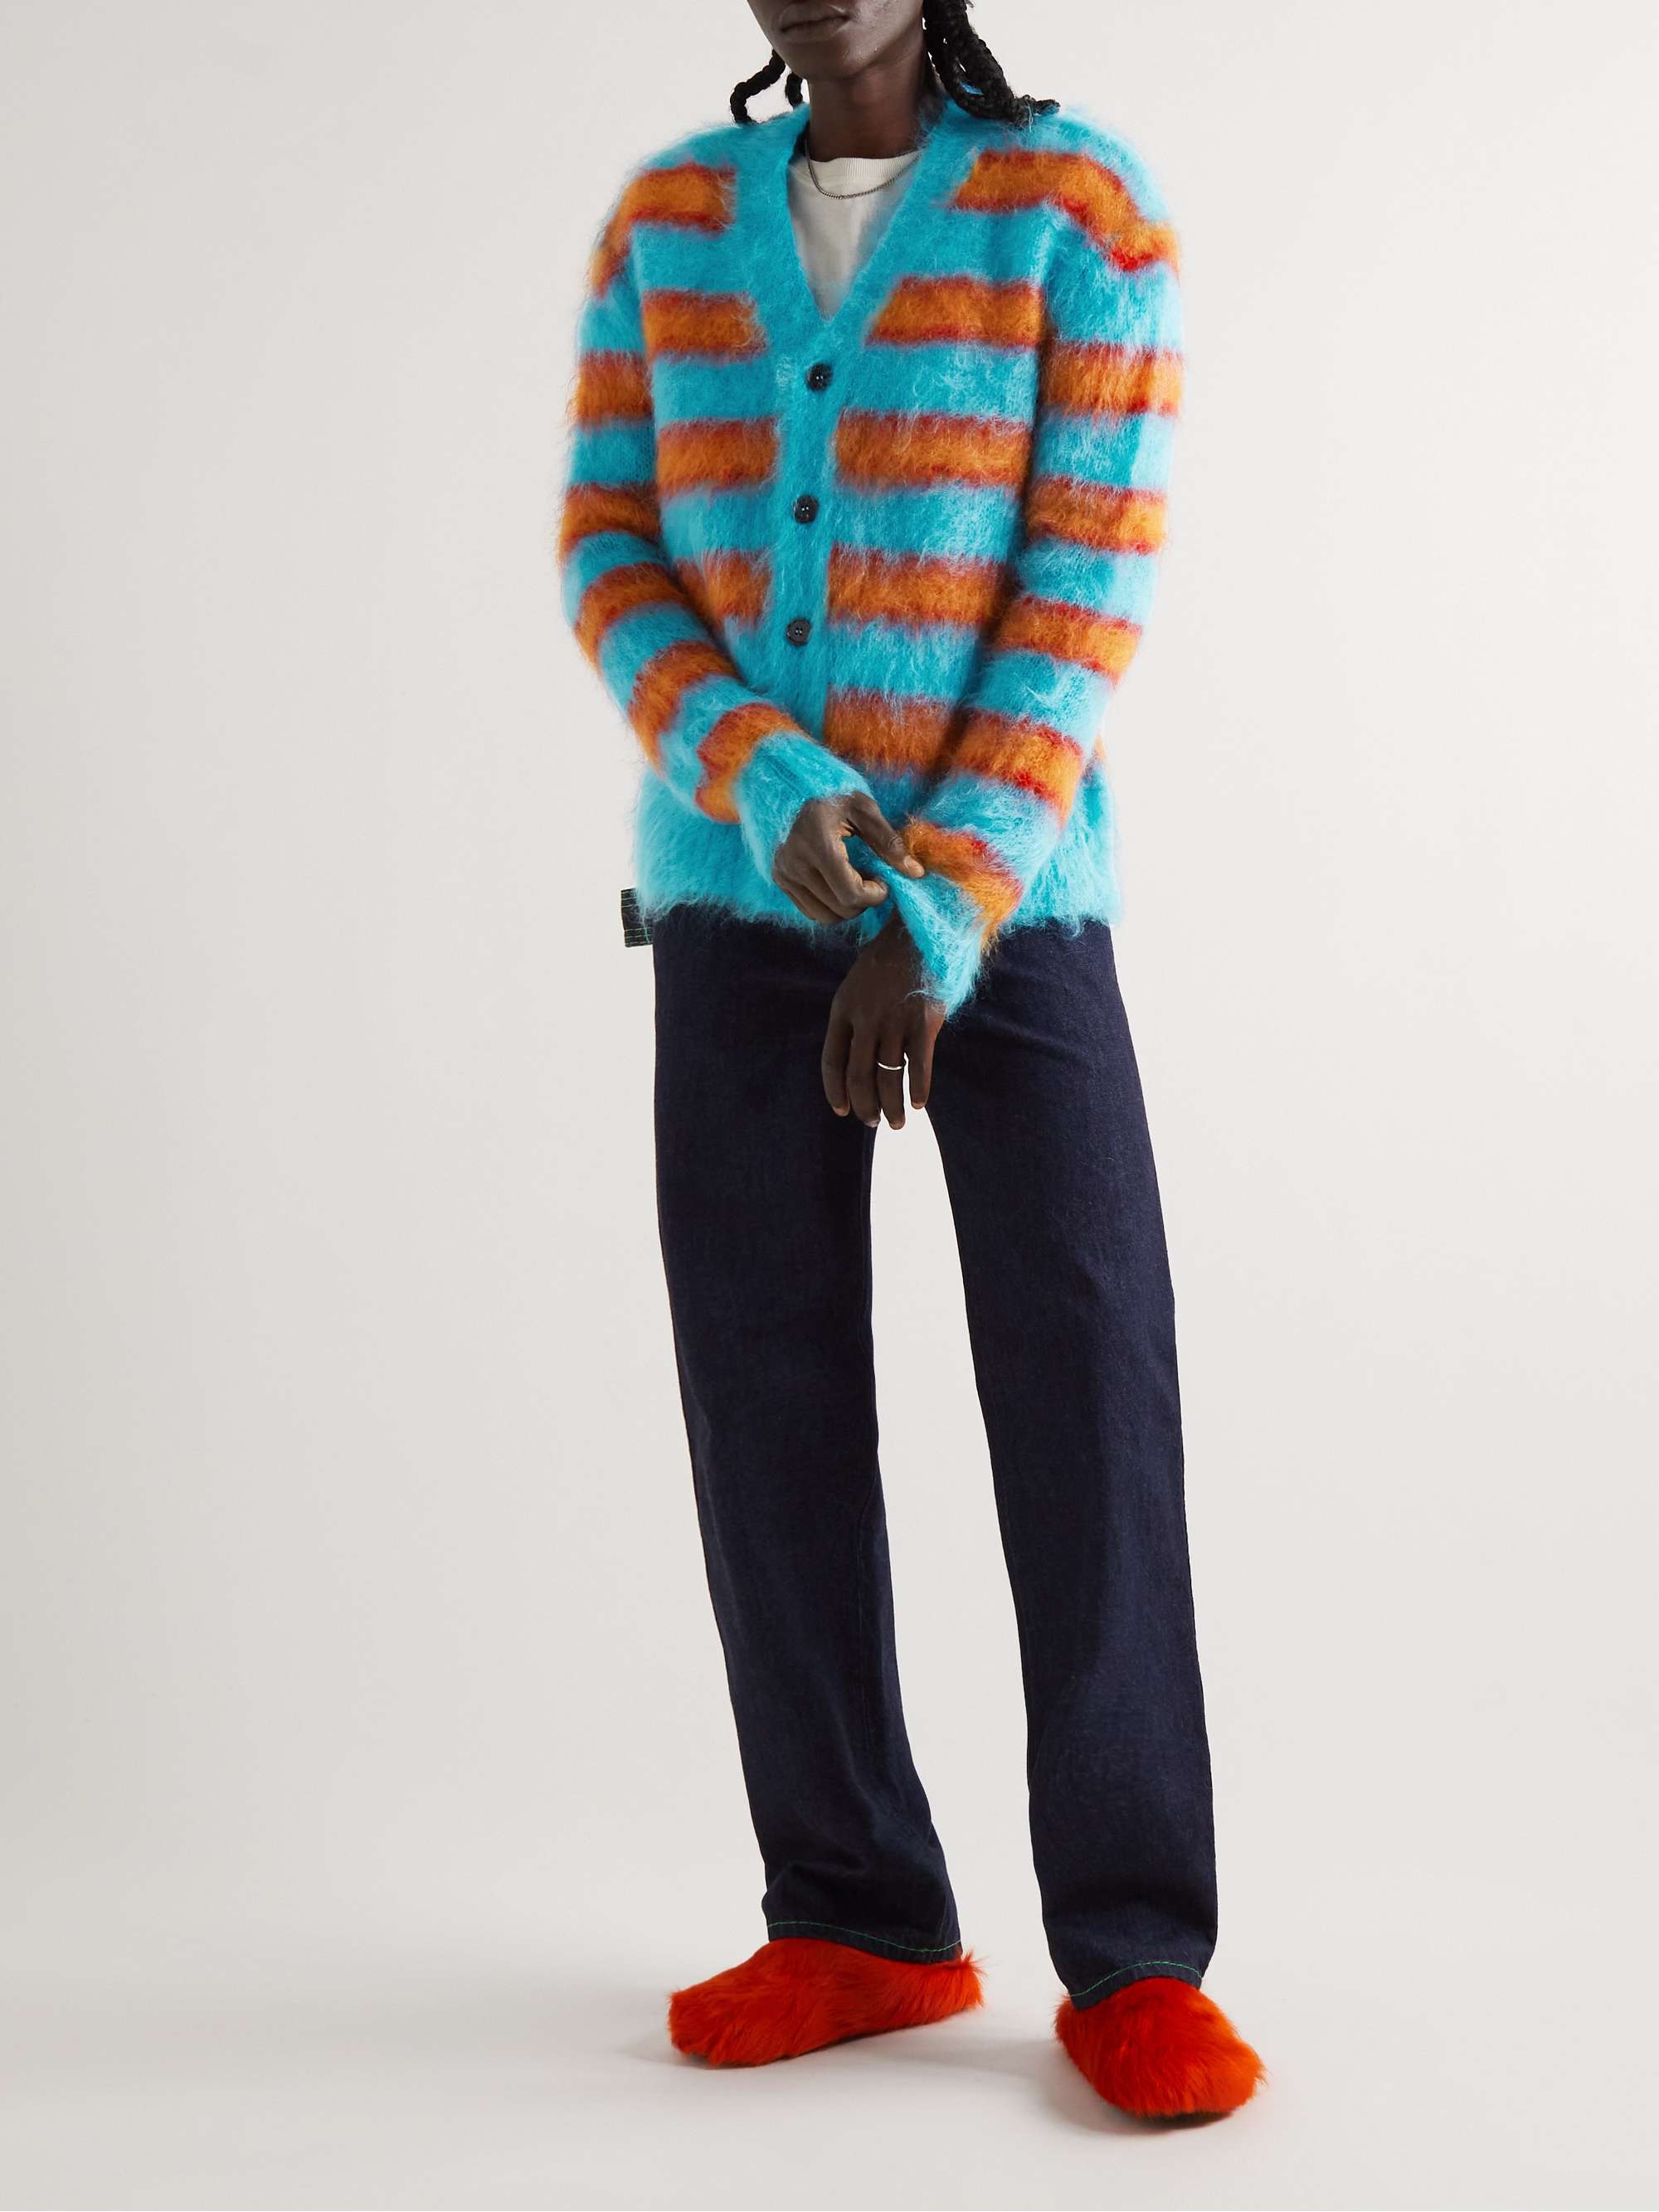 MARNI Striped Brushed Mohair-Blend Cardigan